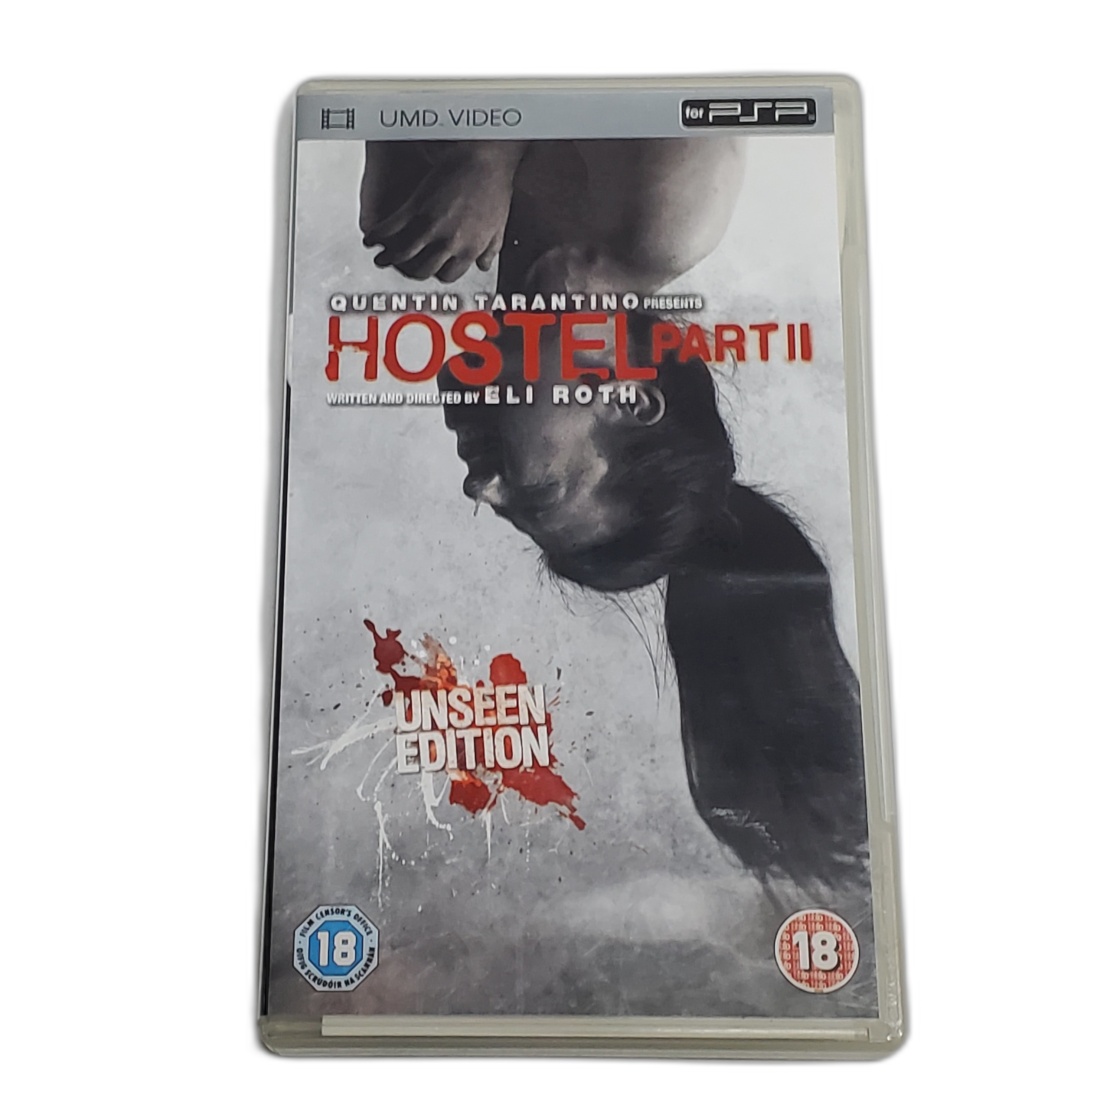 Hostel Part II: Unseen Edition UMD Video for PSP - Rare Collector's Item!